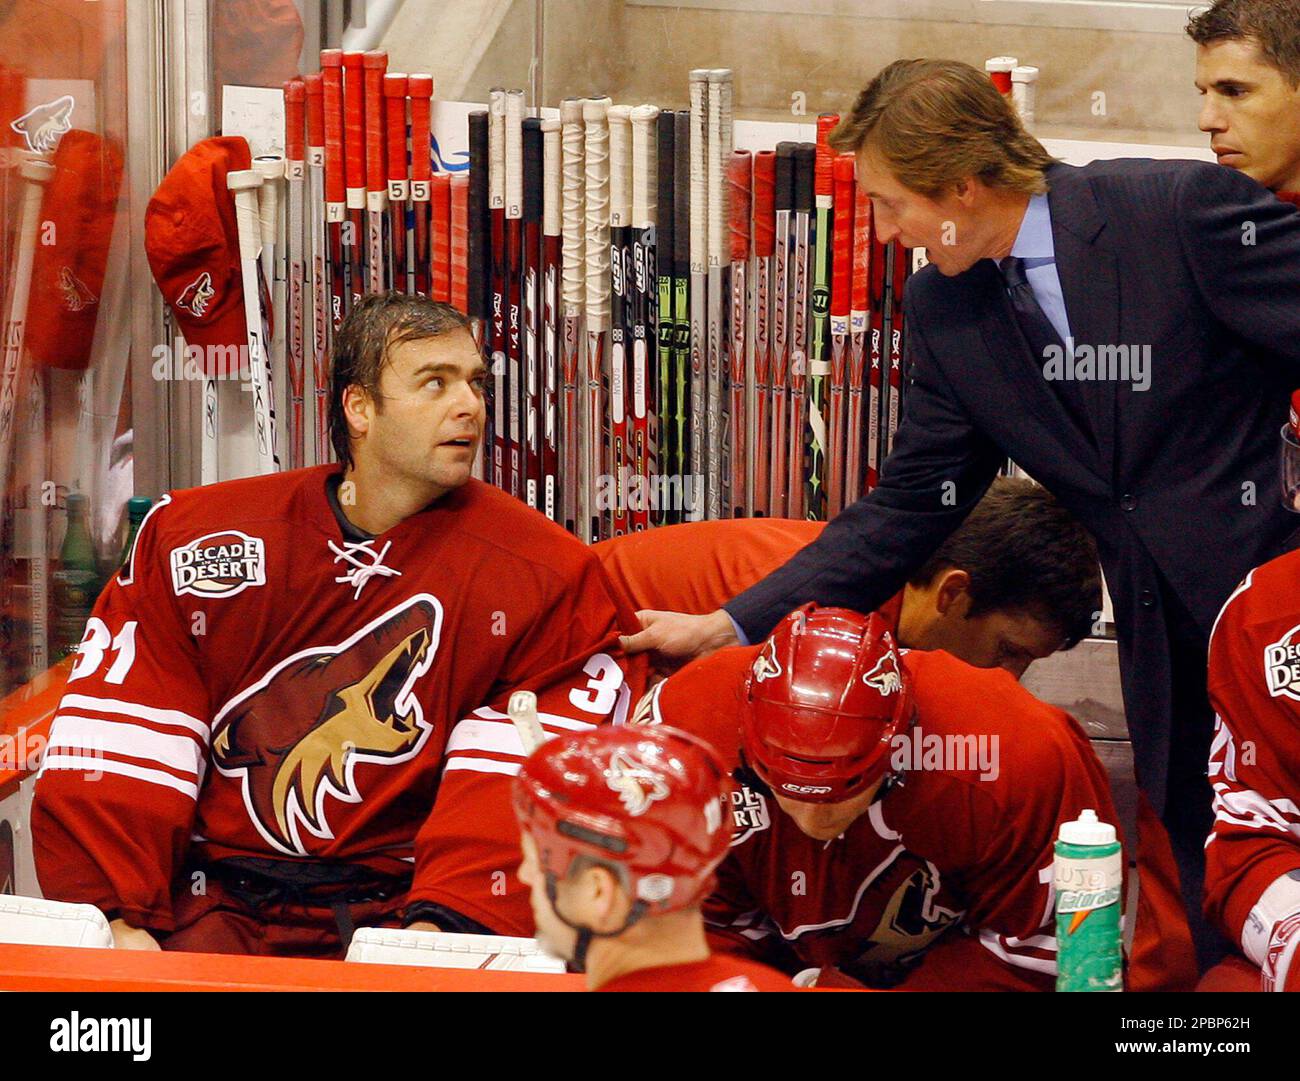 Gretzky steps down as head coach of Coyotes